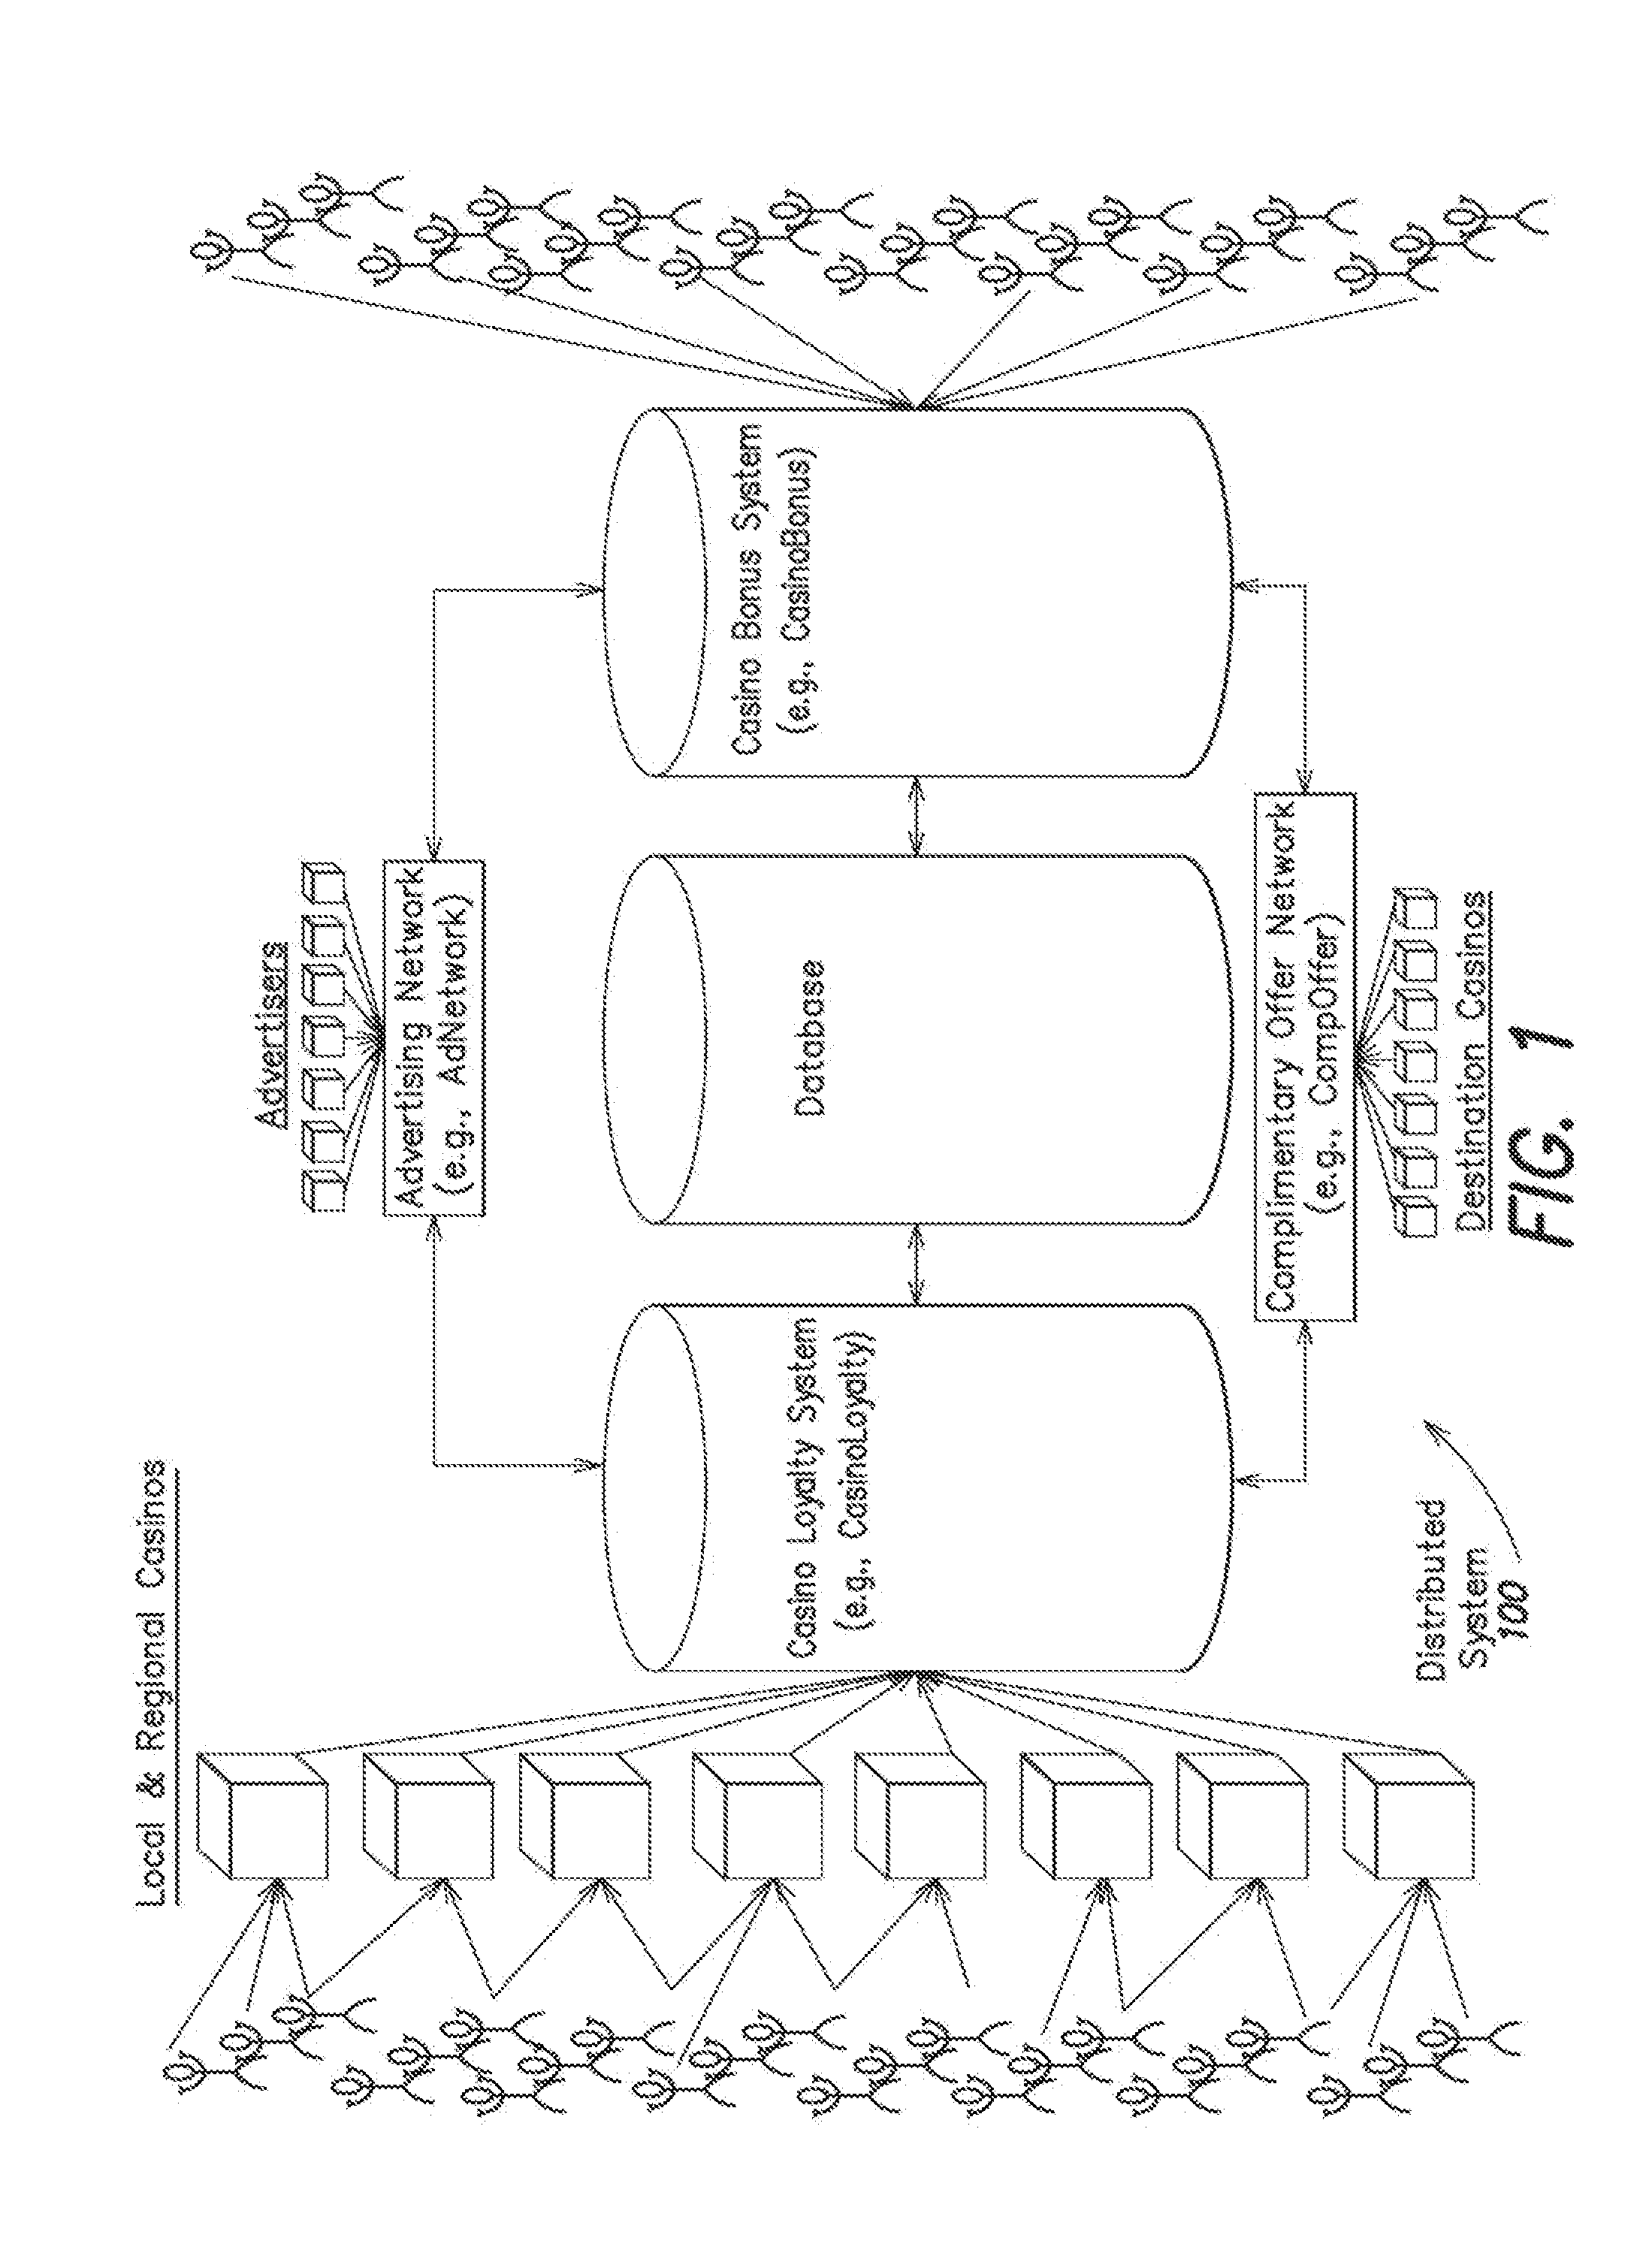 System and Method for Collecting and Using Player Information